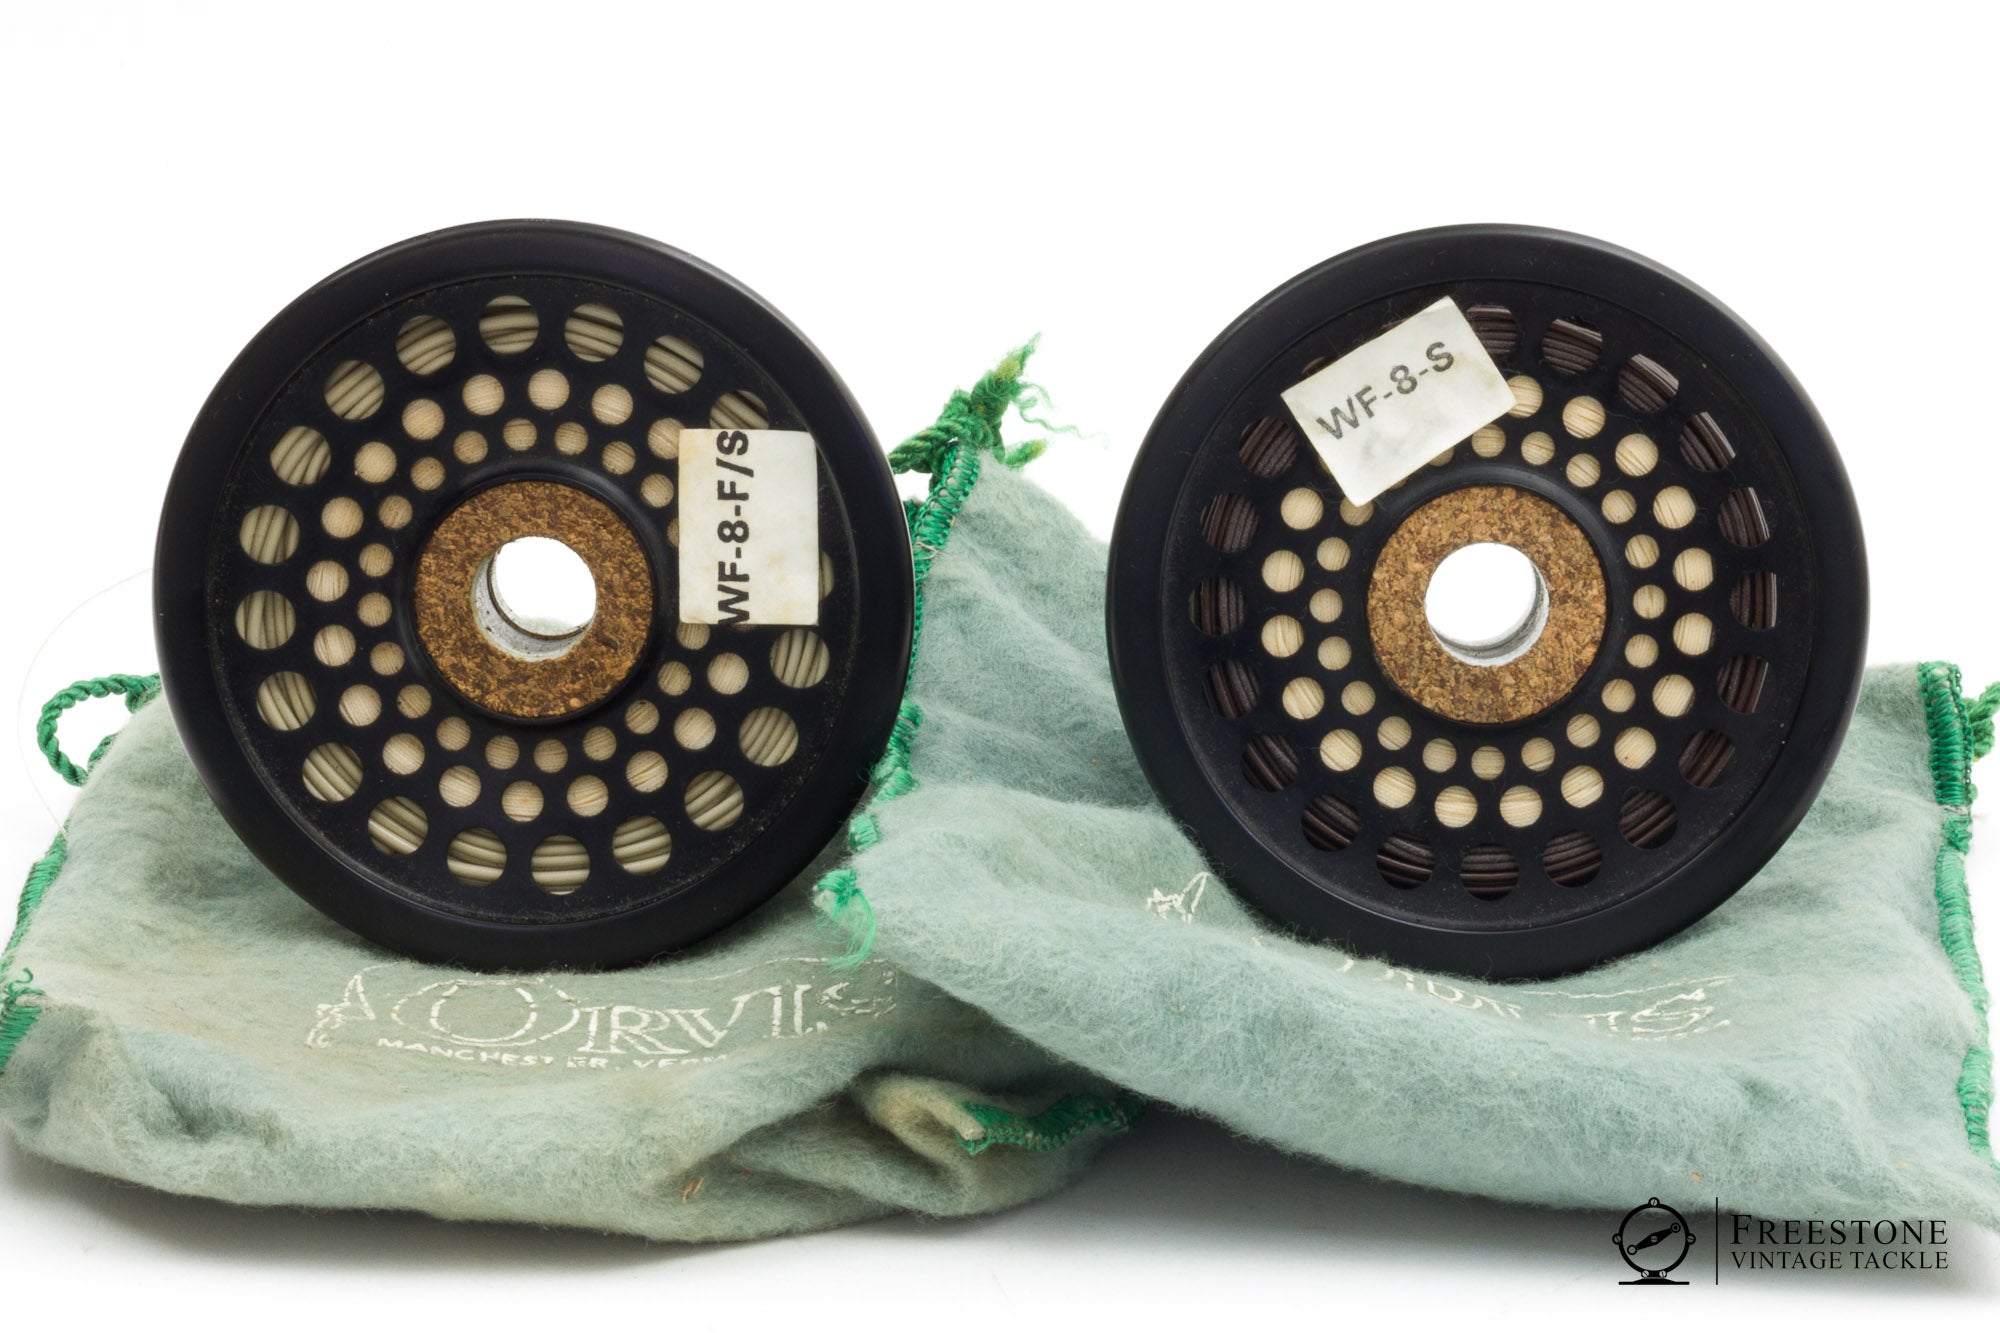 Orvis - S/S/S 7/8 Antireverse Fly Reel w/ 2 Spare Spools - Freestone  Vintage Tackle